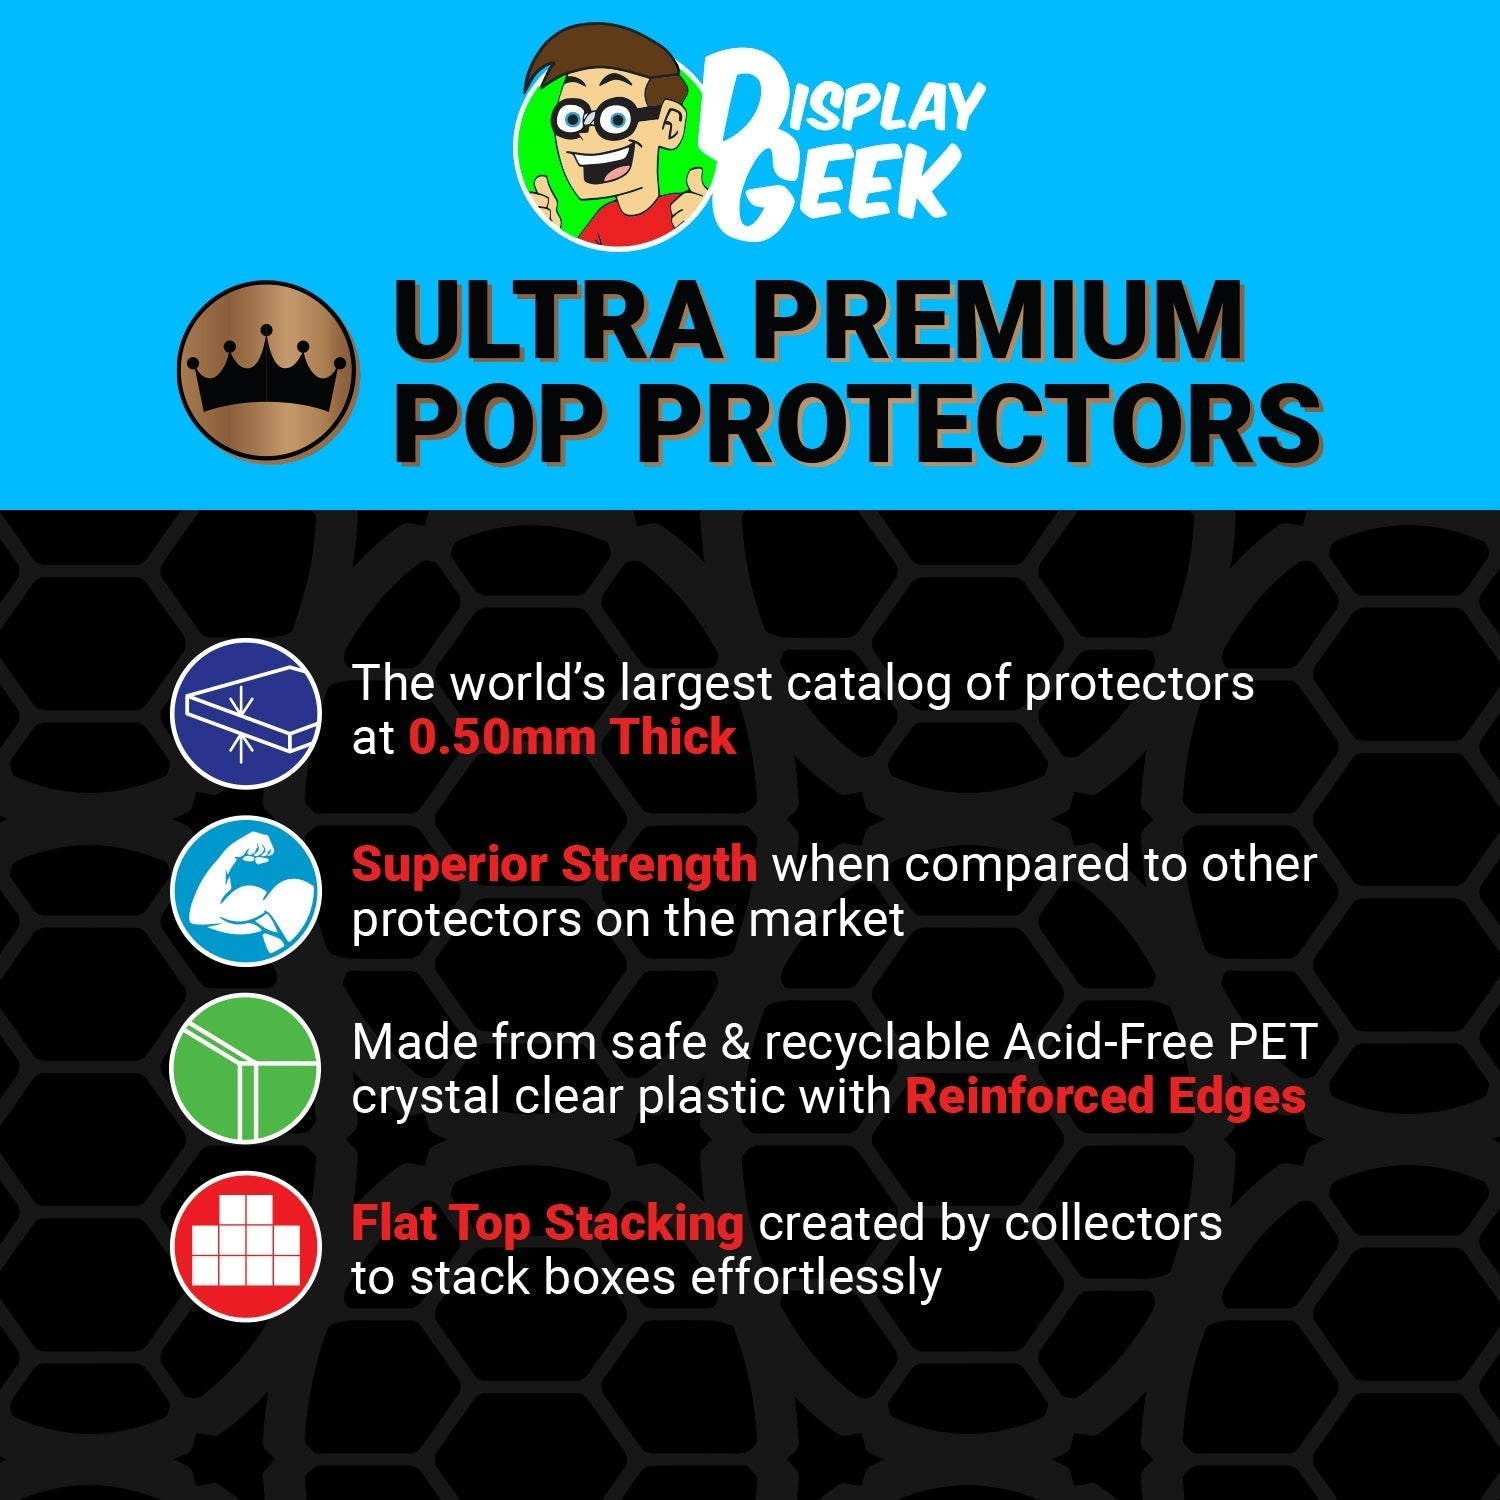 Pop Protector for Big Boy Funko Pop Pez - PPG Pop Protector Guide Search Created by Display Geek